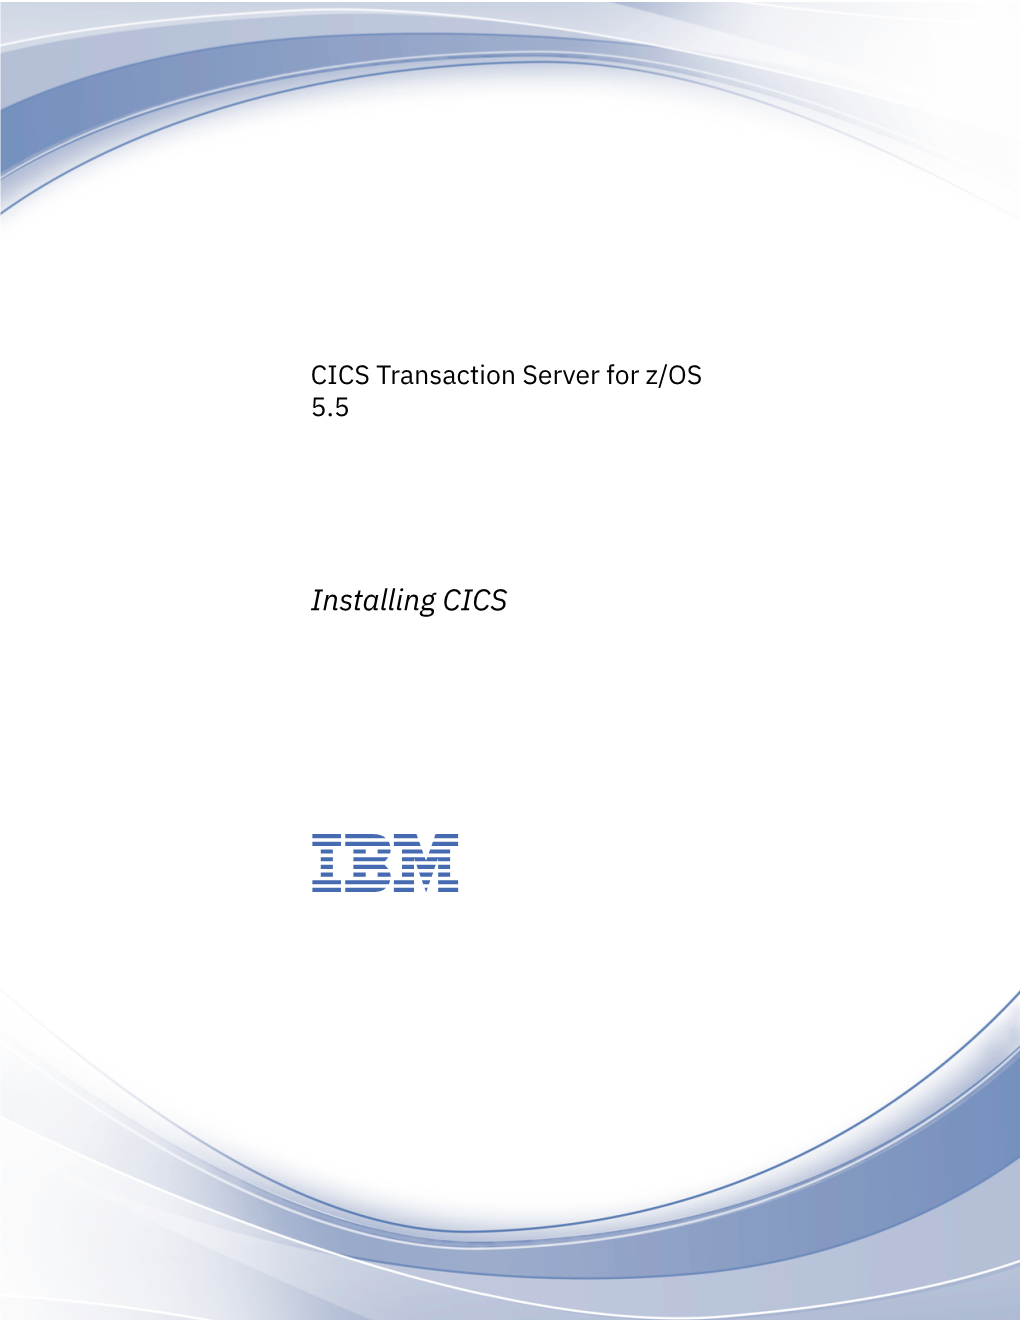 CICS TS for Z/OS: Installing CICS Chapter 1